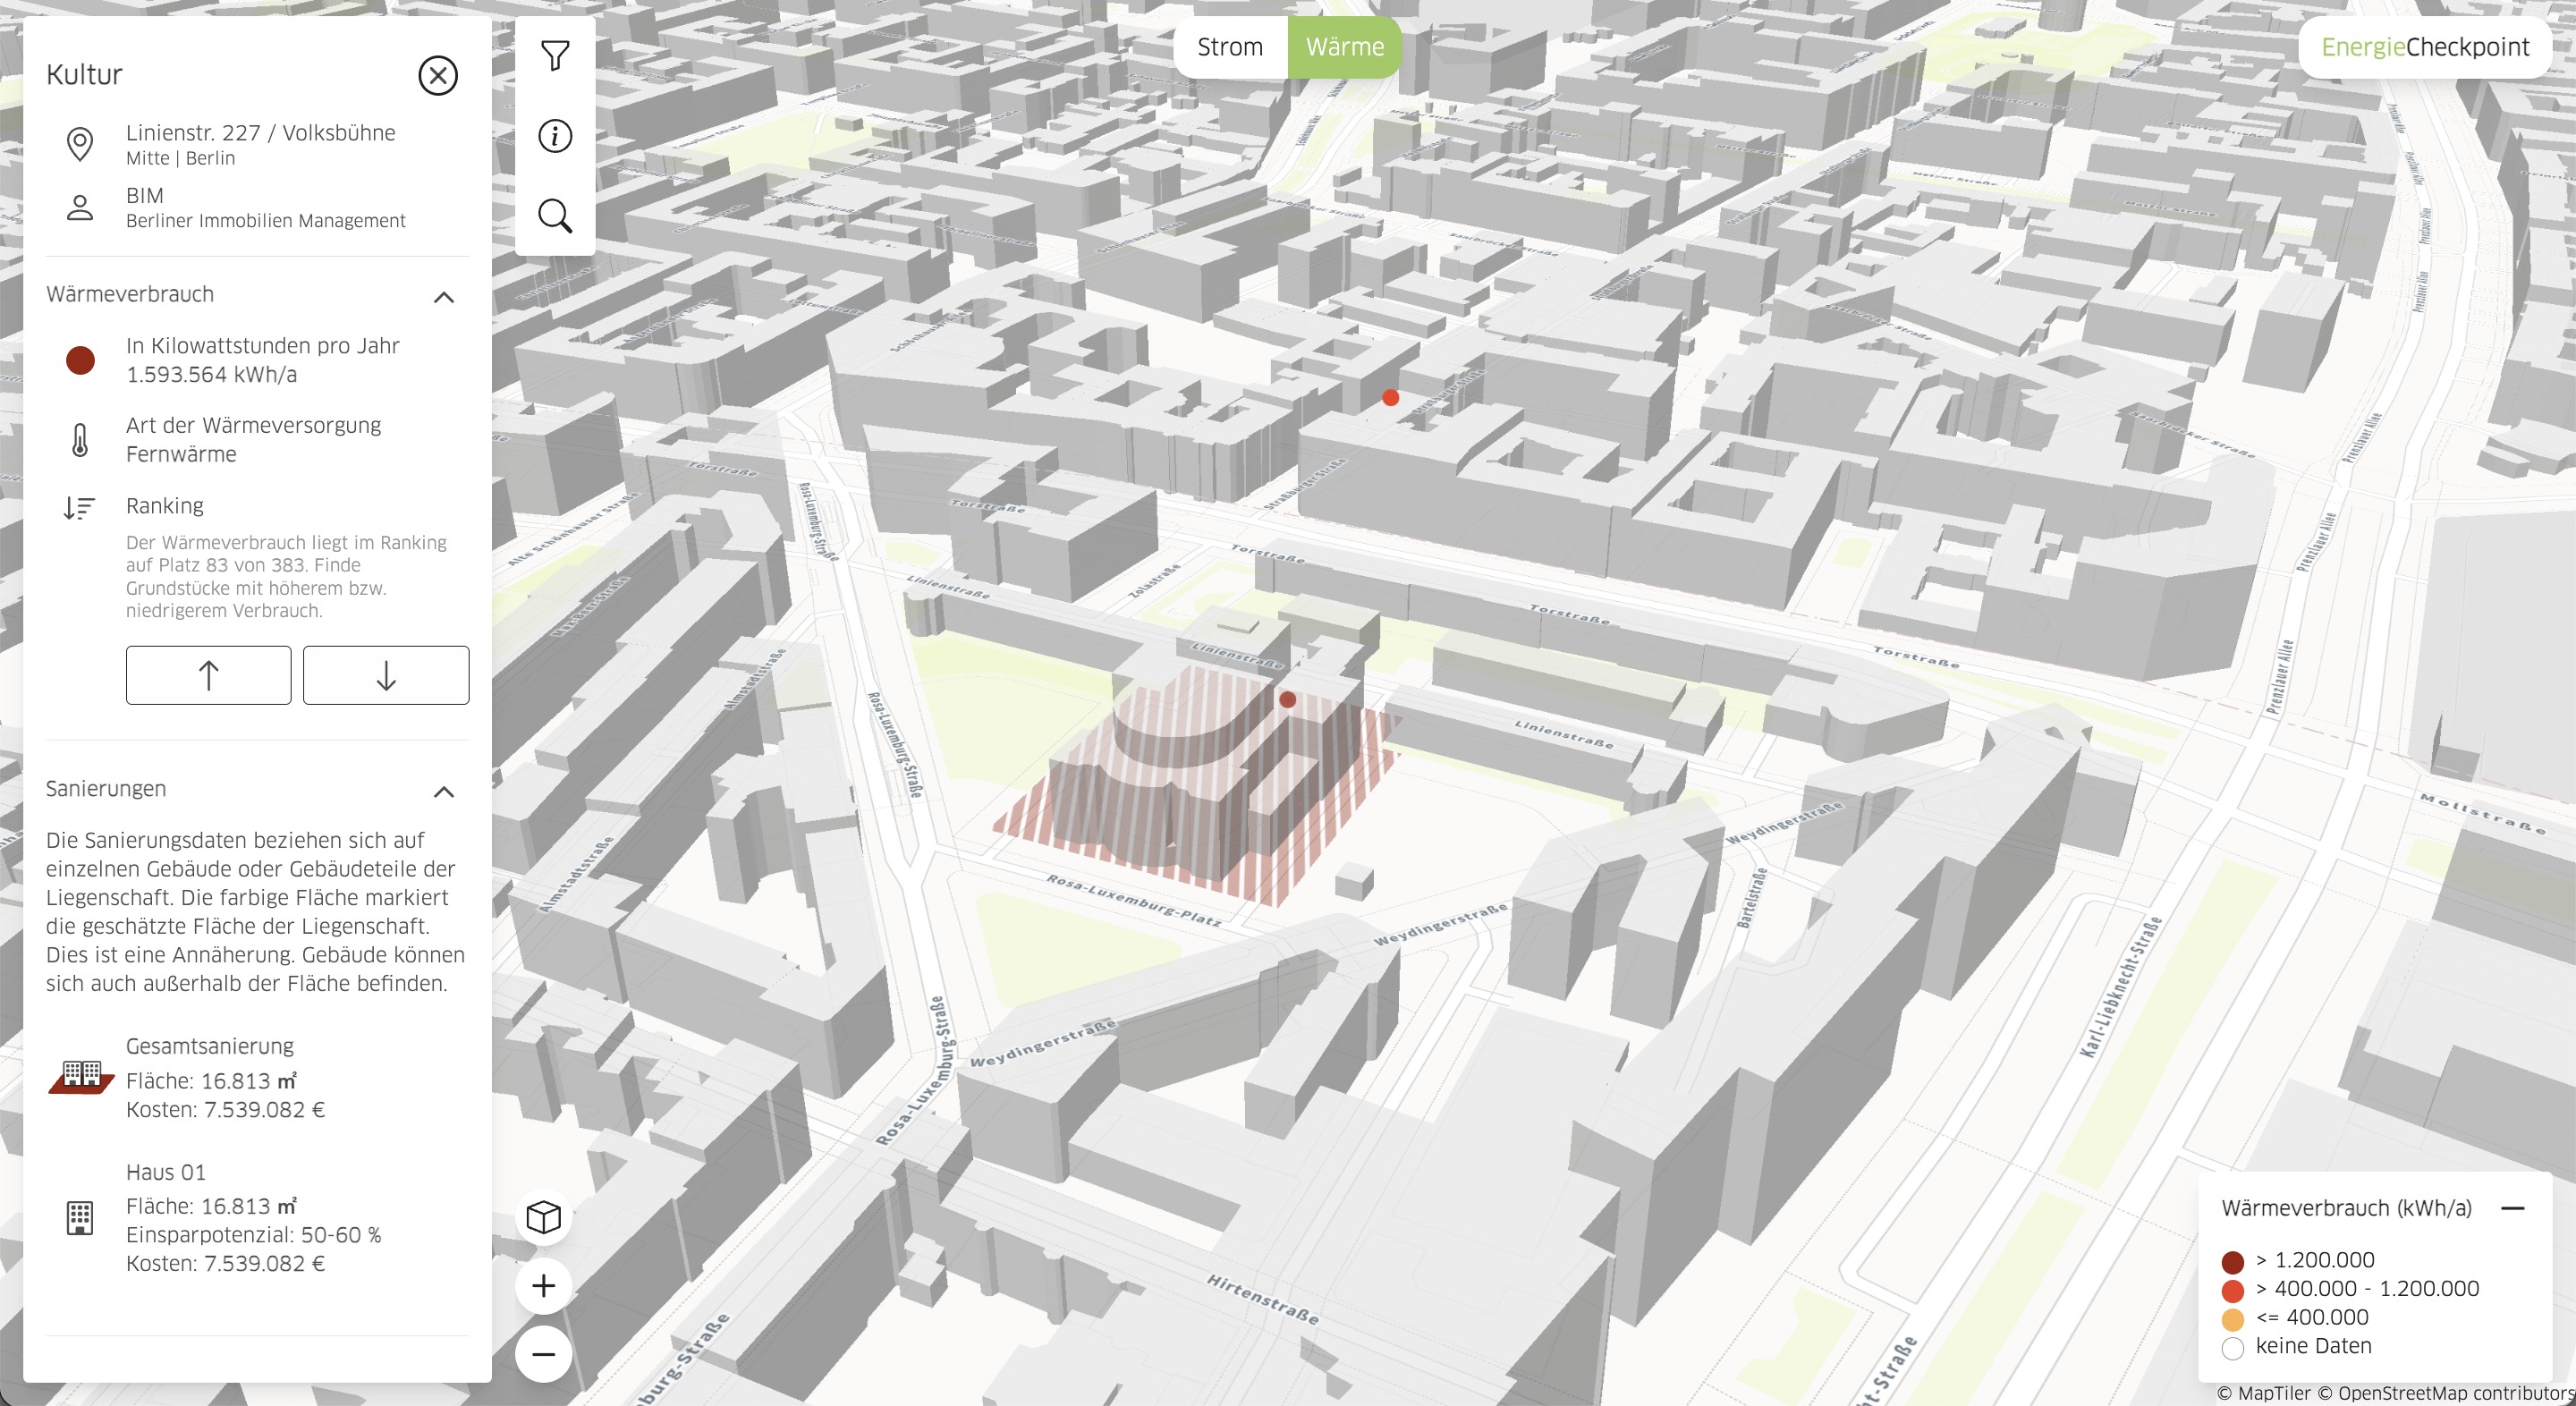 map of public buildings in berlin and their energy use through electricity and heating